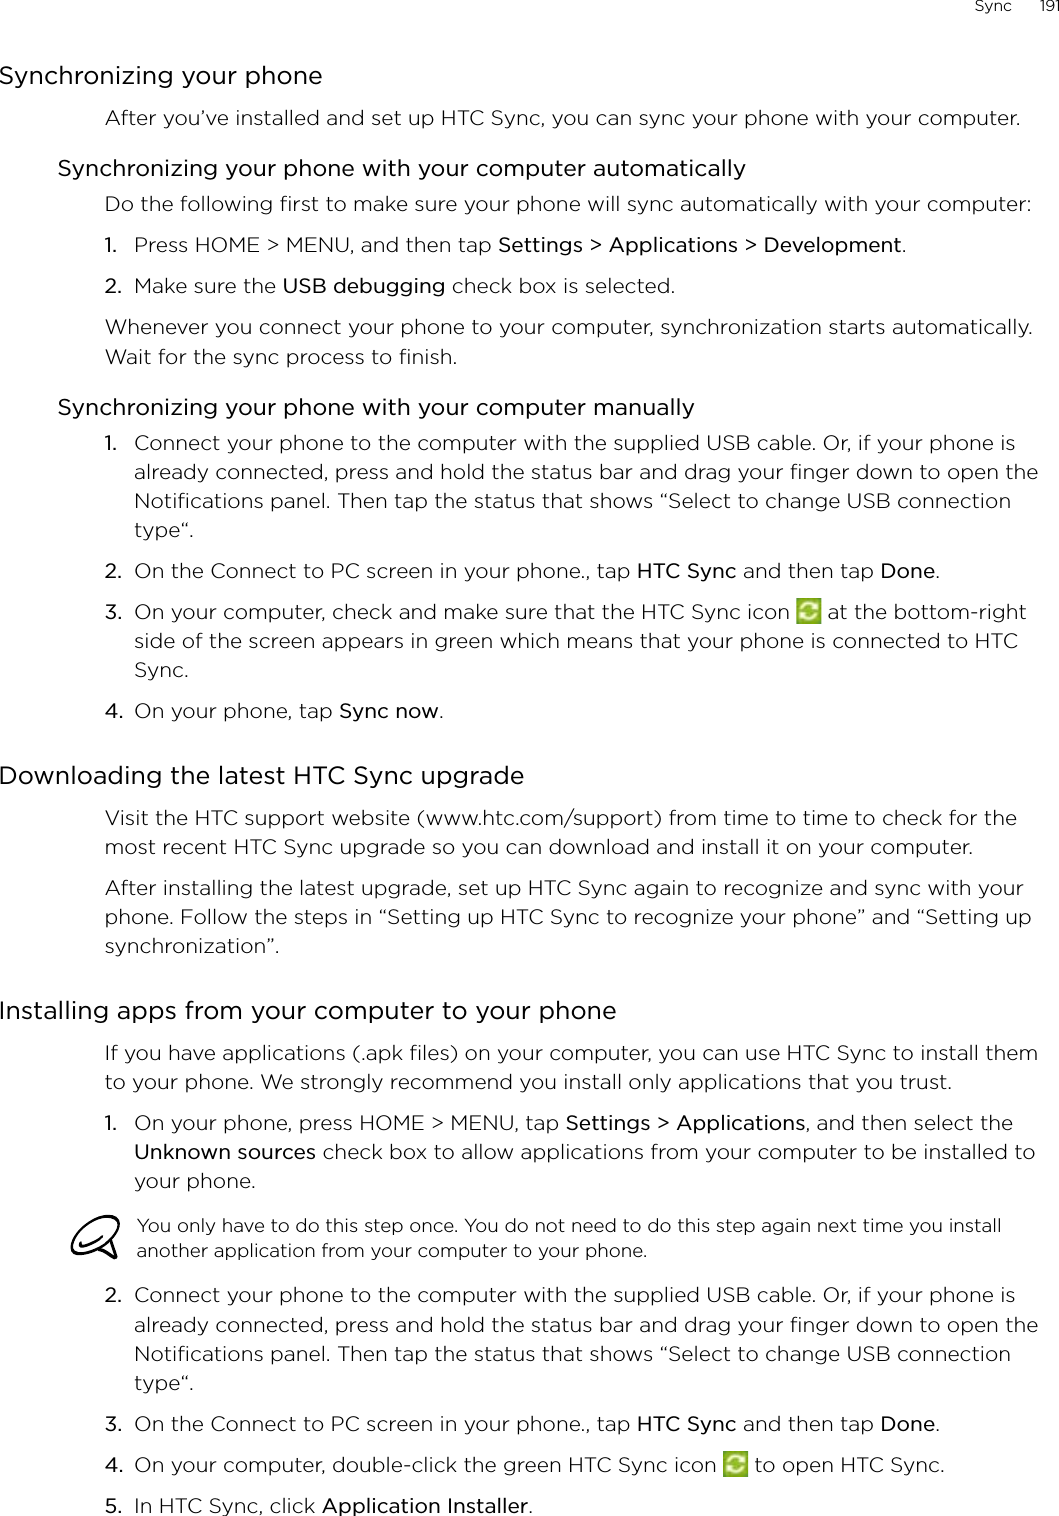 Sync      191Synchronizing your phoneAfter you’ve installed and set up HTC Sync, you can sync your phone with your computer.Synchronizing your phone with your computer automaticallyDo the following first to make sure your phone will sync automatically with your computer:1.  Press HOME &gt; MENU, and then tap Settings &gt; Applications &gt; Development.2.  Make sure the USB debugging check box is selected.Whenever you connect your phone to your computer, synchronization starts automatically. Wait for the sync process to finish.Synchronizing your phone with your computer manuallyConnect your phone to the computer with the supplied USB cable. Or, if your phone is already connected, press and hold the status bar and drag your finger down to open the Notifications panel. Then tap the status that shows “Select to change USB connection type“.On the Connect to PC screen in your phone., tap HTC Sync and then tap Done.On your computer, check and make sure that the HTC Sync icon   at the bottom-right side of the screen appears in green which means that your phone is connected to HTC Sync. On your phone, tap Sync now.Downloading the latest HTC Sync upgradeVisit the HTC support website (www.htc.com/support) from time to time to check for the most recent HTC Sync upgrade so you can download and install it on your computer.After installing the latest upgrade, set up HTC Sync again to recognize and sync with your phone. Follow the steps in “Setting up HTC Sync to recognize your phone” and “Setting up synchronization”. Installing apps from your computer to your phoneIf you have applications (.apk files) on your computer, you can use HTC Sync to install them to your phone. We strongly recommend you install only applications that you trust.1.  On your phone, press HOME &gt; MENU, tap Settings &gt; Applications, and then select the Unknown sources check box to allow applications from your computer to be installed to your phone.You only have to do this step once. You do not need to do this step again next time you install another application from your computer to your phone.2.  Connect your phone to the computer with the supplied USB cable. Or, if your phone is already connected, press and hold the status bar and drag your finger down to open the Notifications panel. Then tap the status that shows “Select to change USB connection type“.3.  On the Connect to PC screen in your phone., tap HTC Sync and then tap Done.4.  On your computer, double-click the green HTC Sync icon   to open HTC Sync.5.  In HTC Sync, click Application Installer. 1.2.3.4.